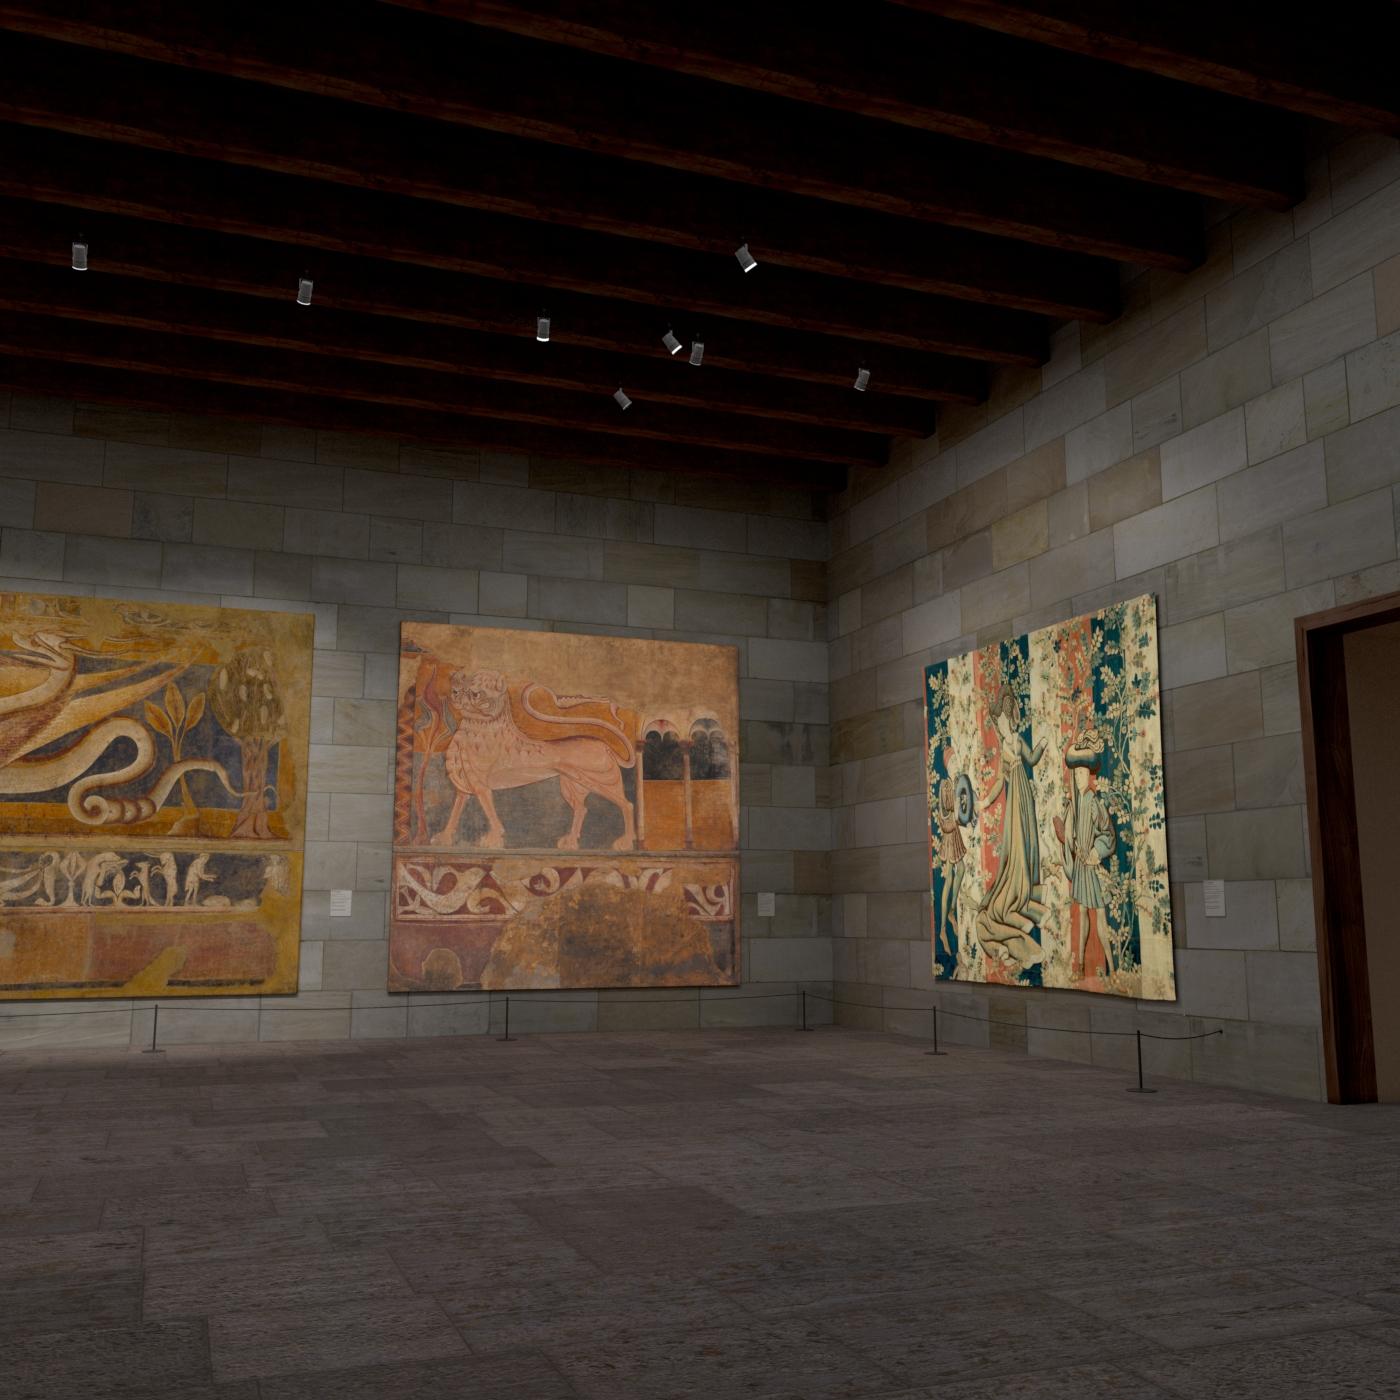 Digitally rendered view of The Met Cloisters, gallery 1. The room made of large stone and frescos of large creatures are on display.  